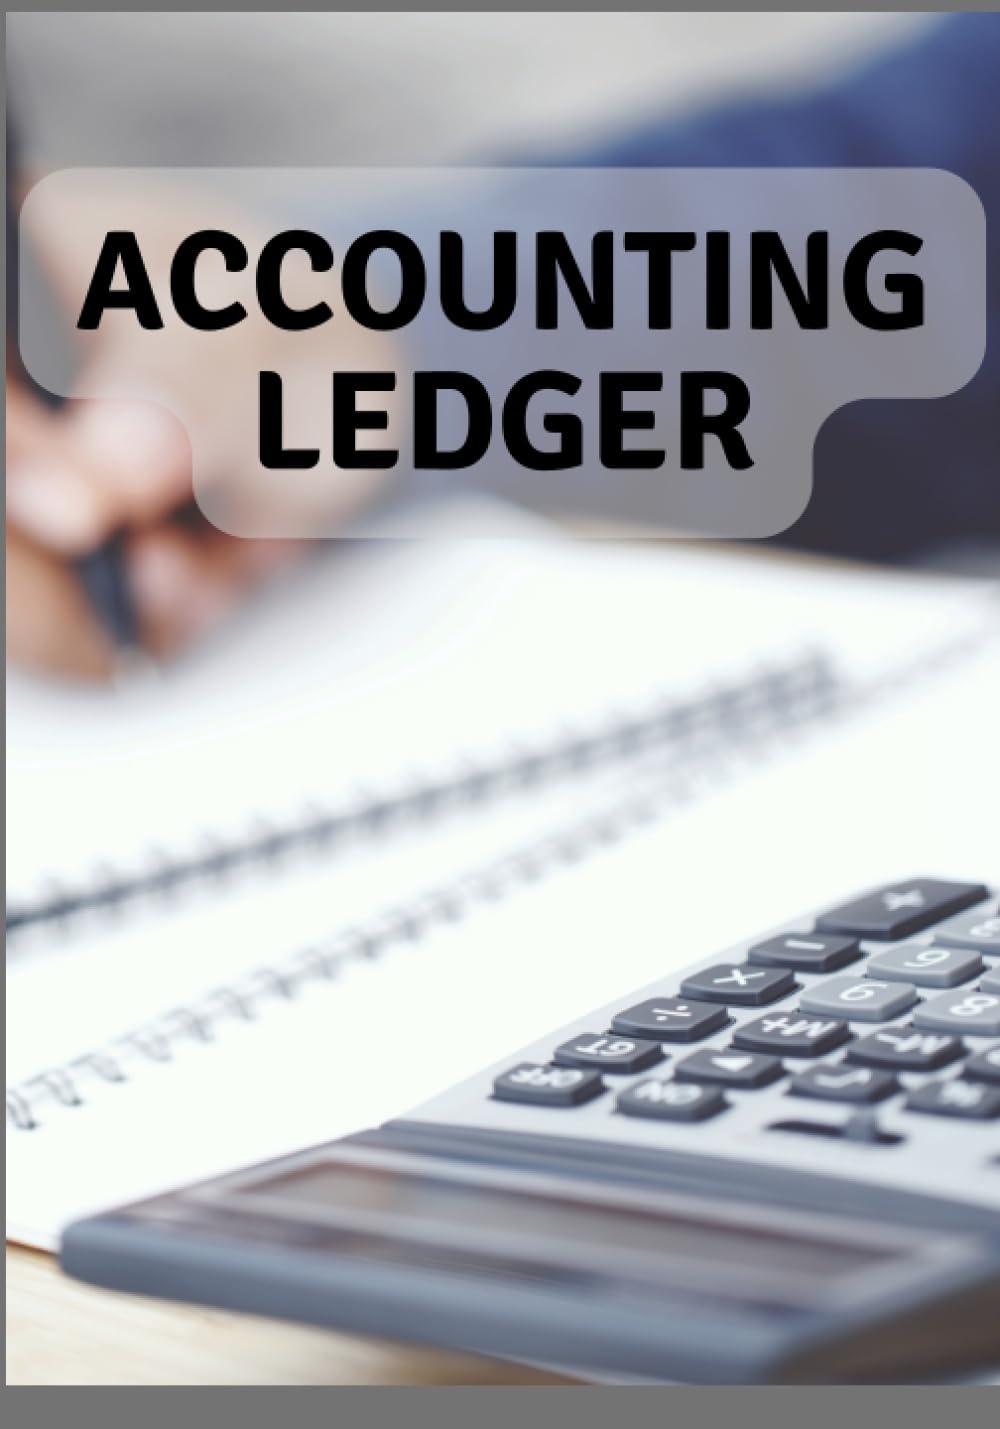 accounting ledger a ledger for home or small business 1st edition christian bloomfield b0c9slynk1